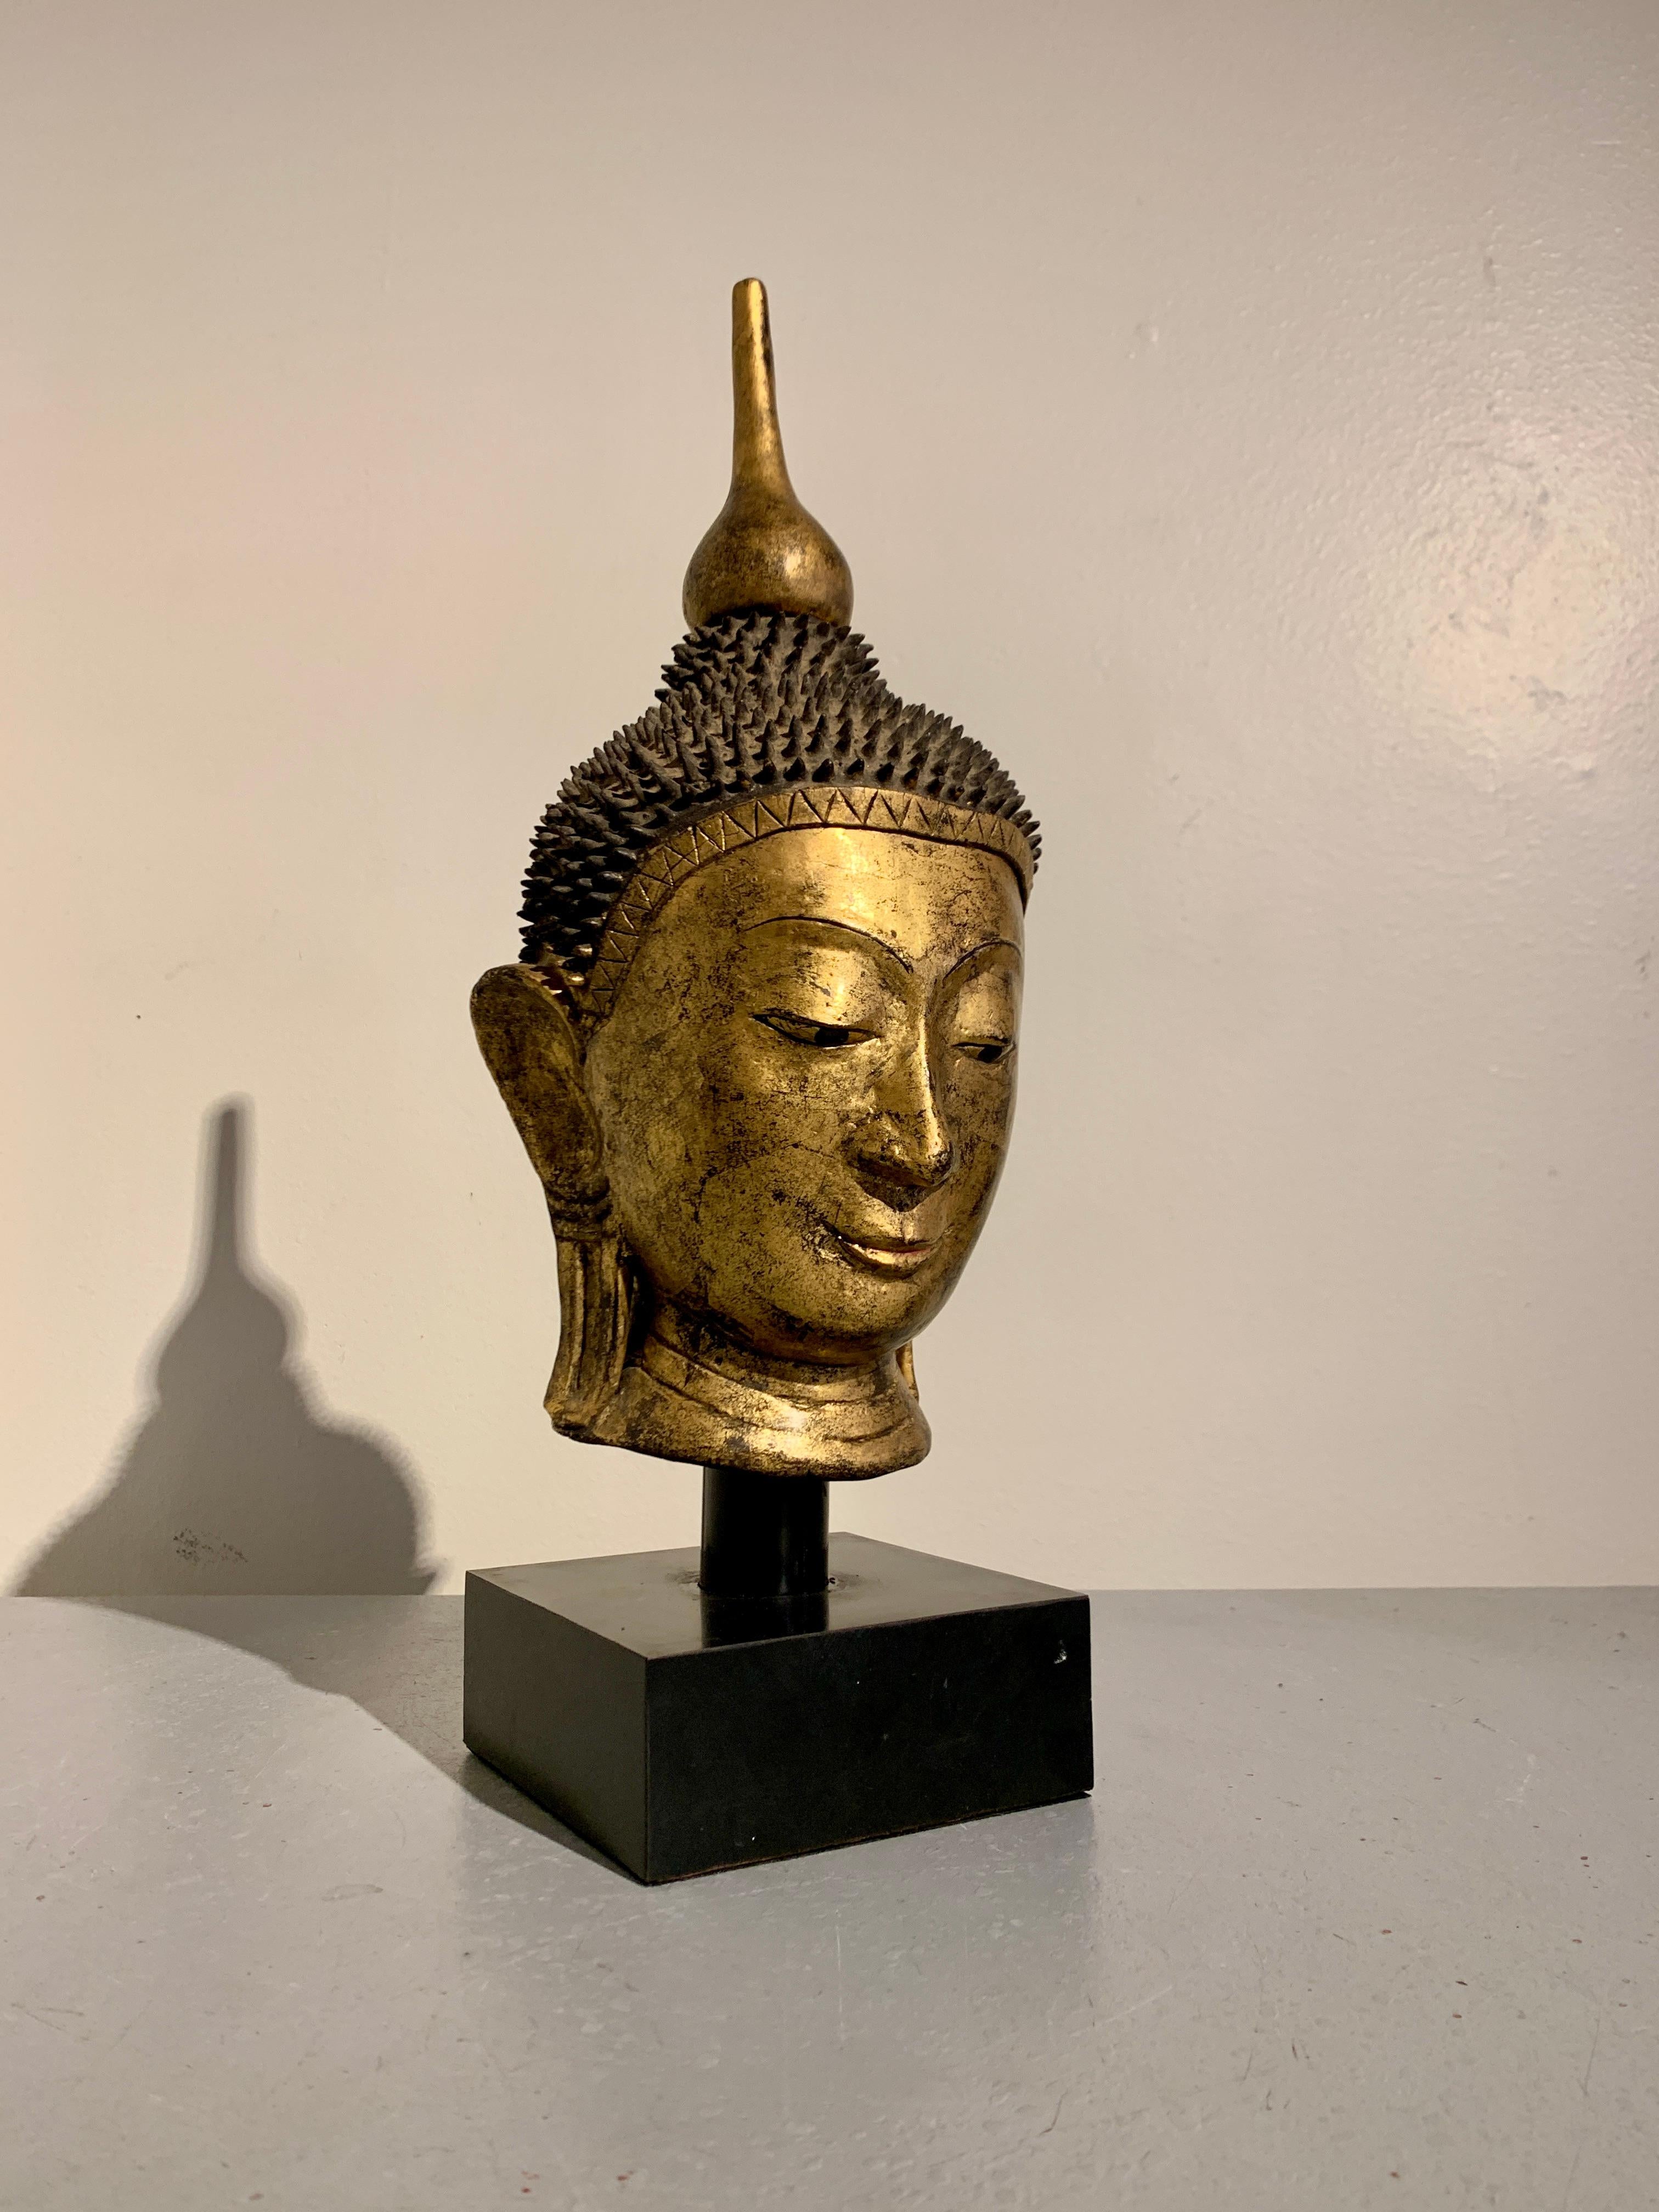 A serene vintage Buddha head of gilt dry lacquer in the Shan Burmese style, but made in Thailand for the export market, circa 1960s, mounted on a black laminate base. 

The Buddha head crafted in the dry lacquer technique, and richly gilt. The